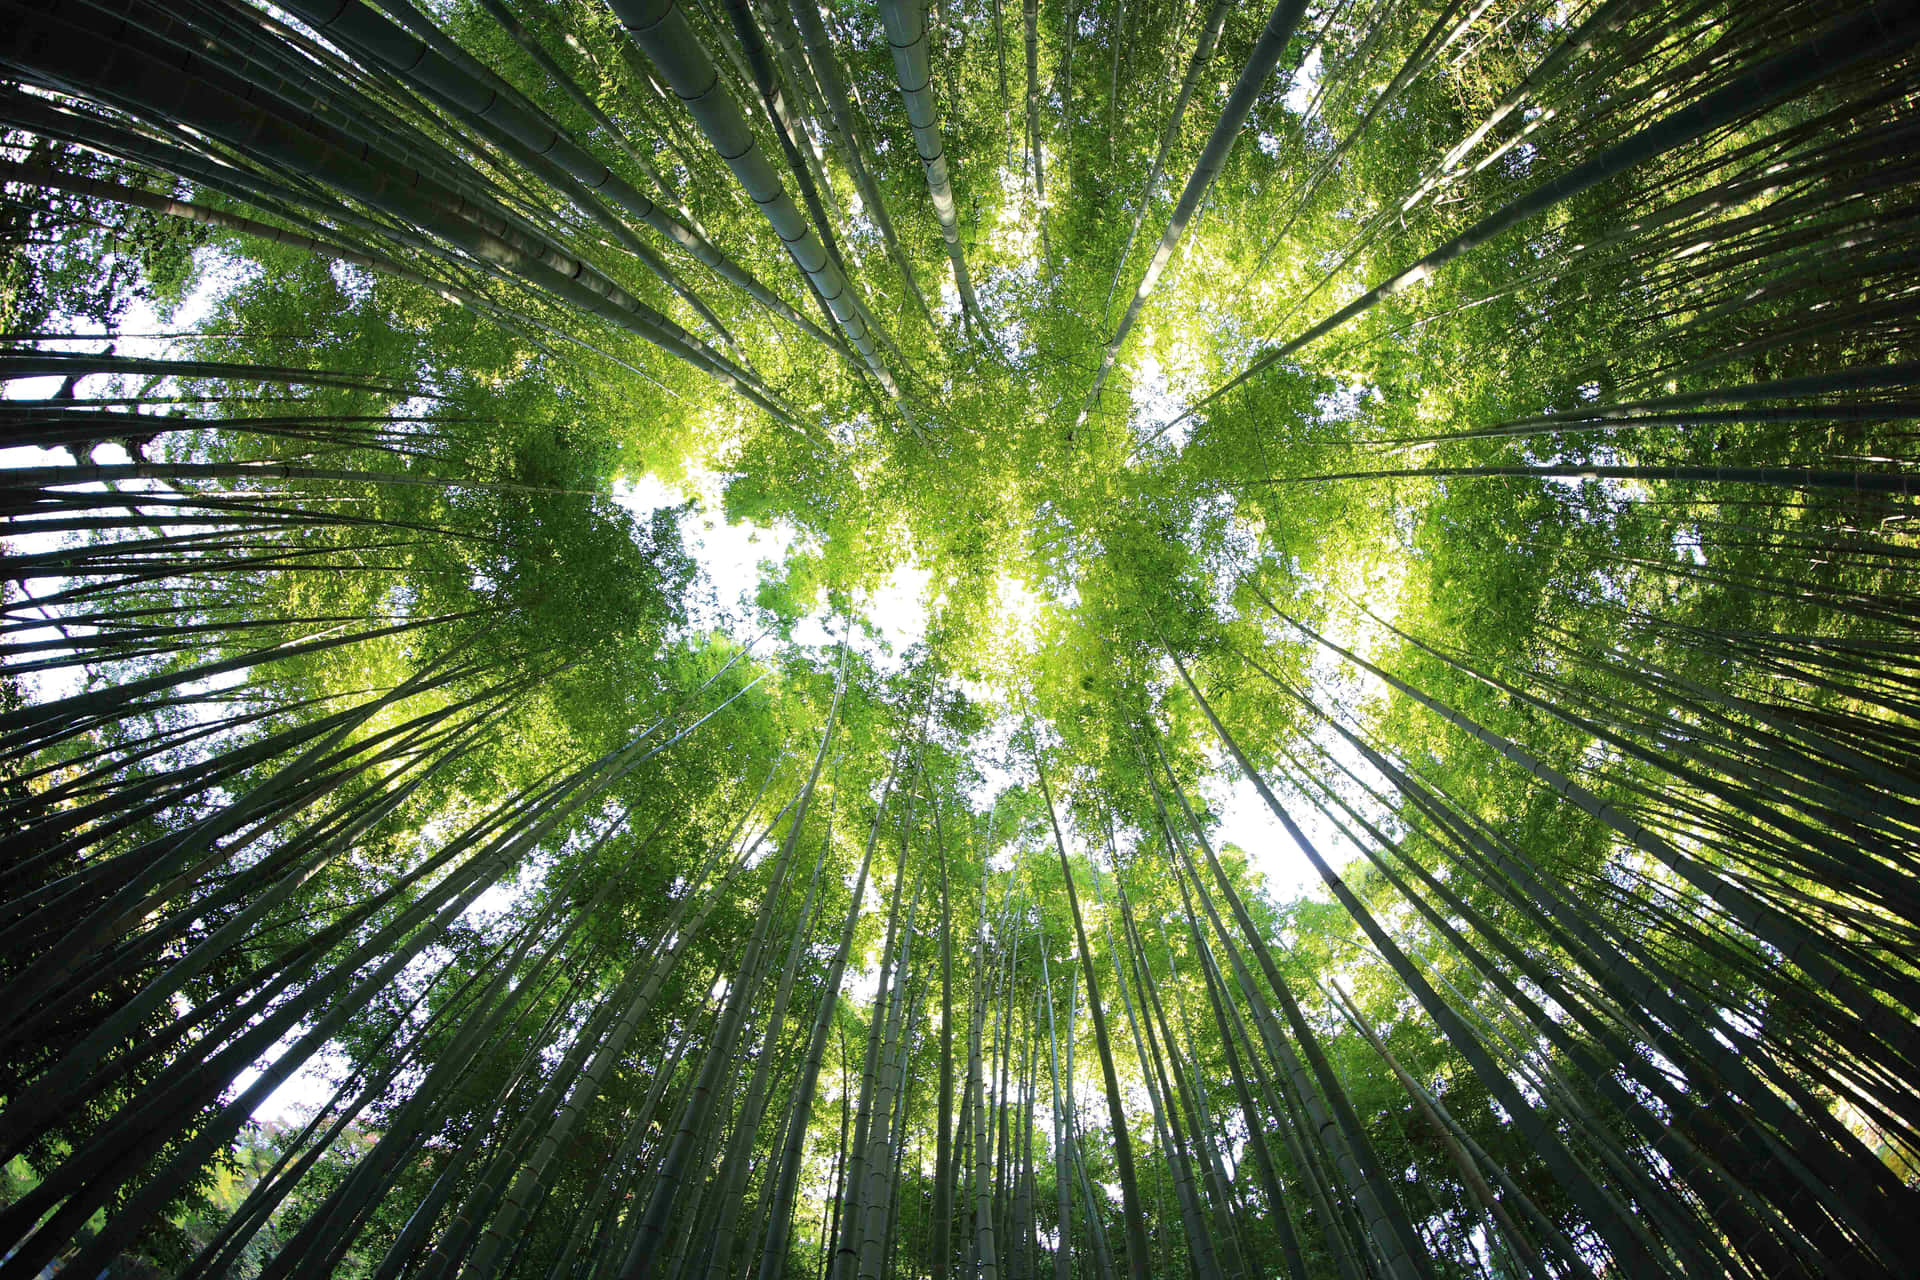 A View Of A Bamboo Forest With Green Trees